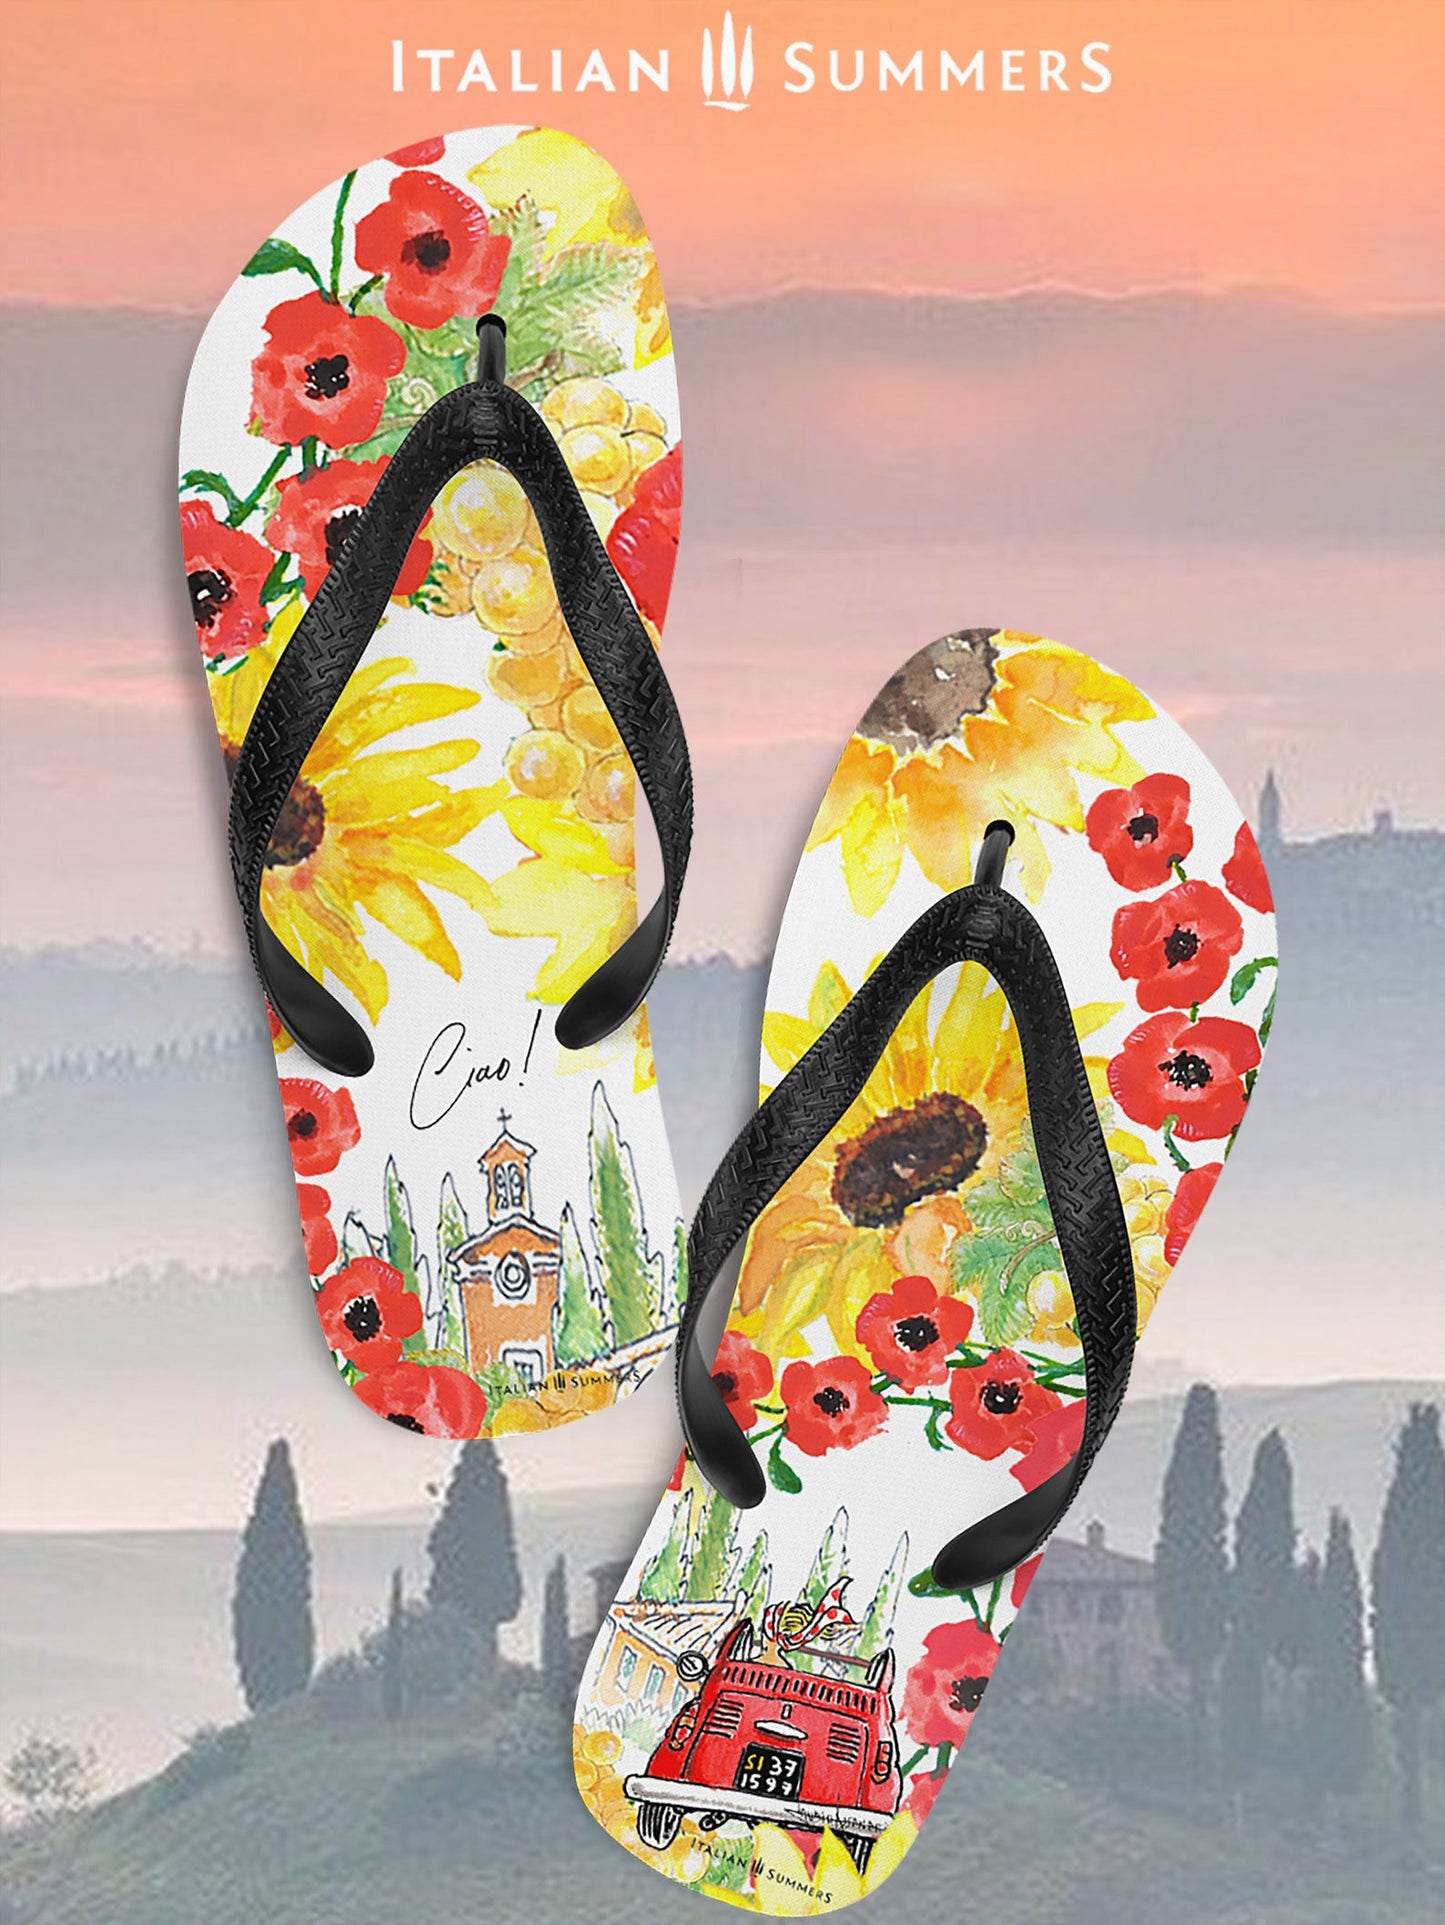 Italy Tuscany inspired flip flops with watercolor illustrations  printed  with sunflowers, poppies, Tuscan scenes , a red vintage FIAT 500 car speeding down a country lane . Made by Italian Summers